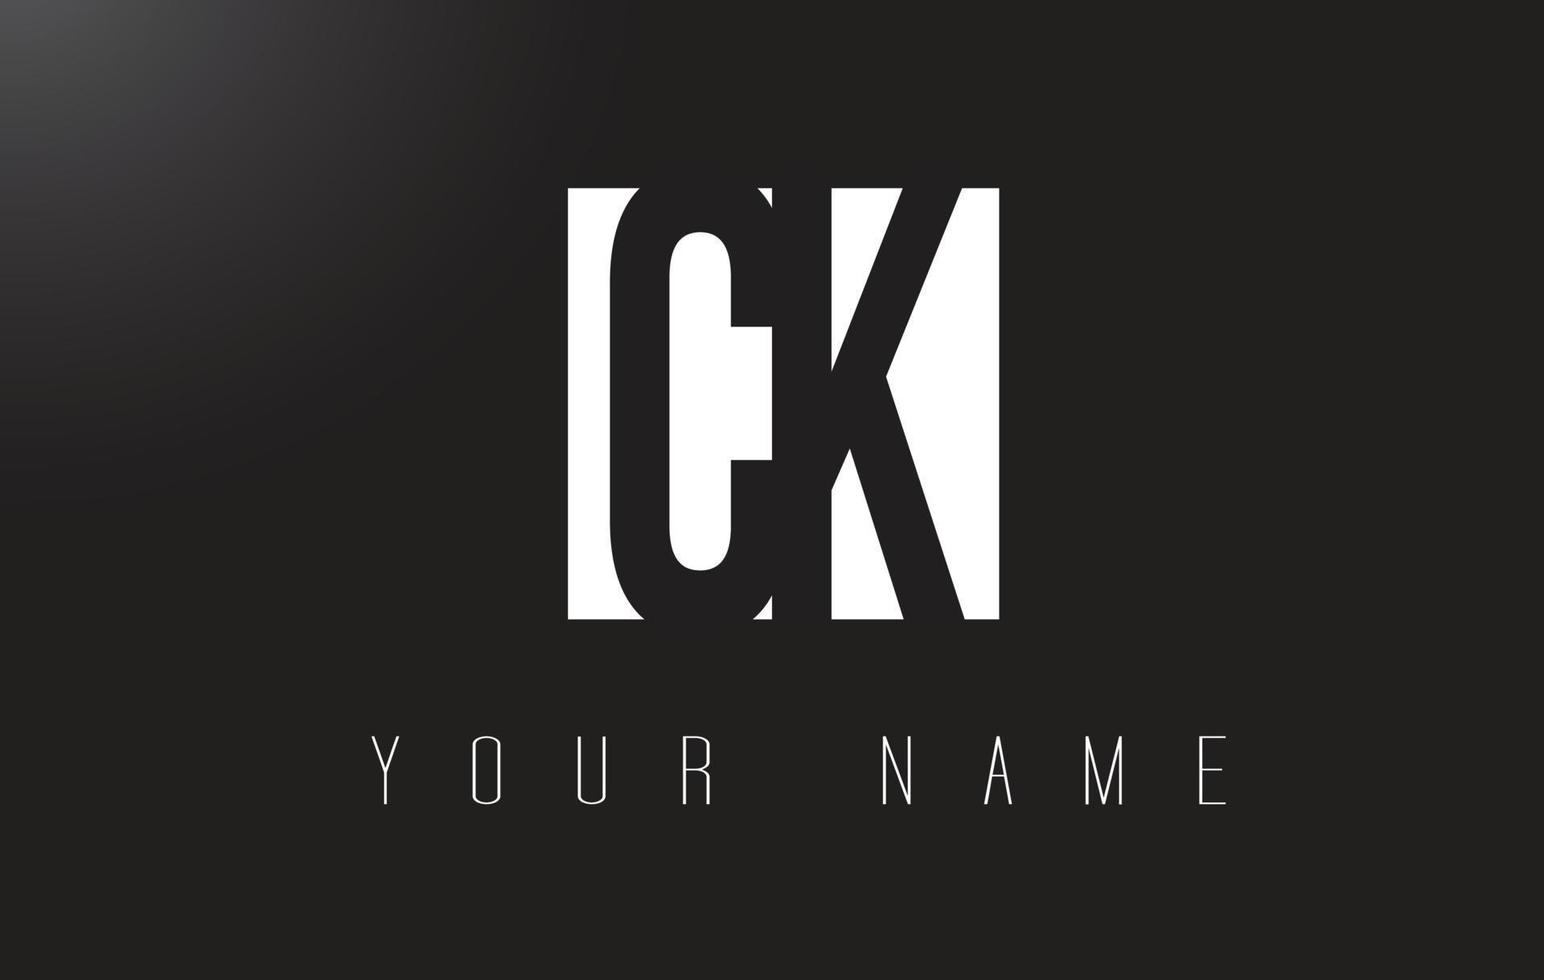 CK Letter Logo With Black and White Negative Space Design. vector